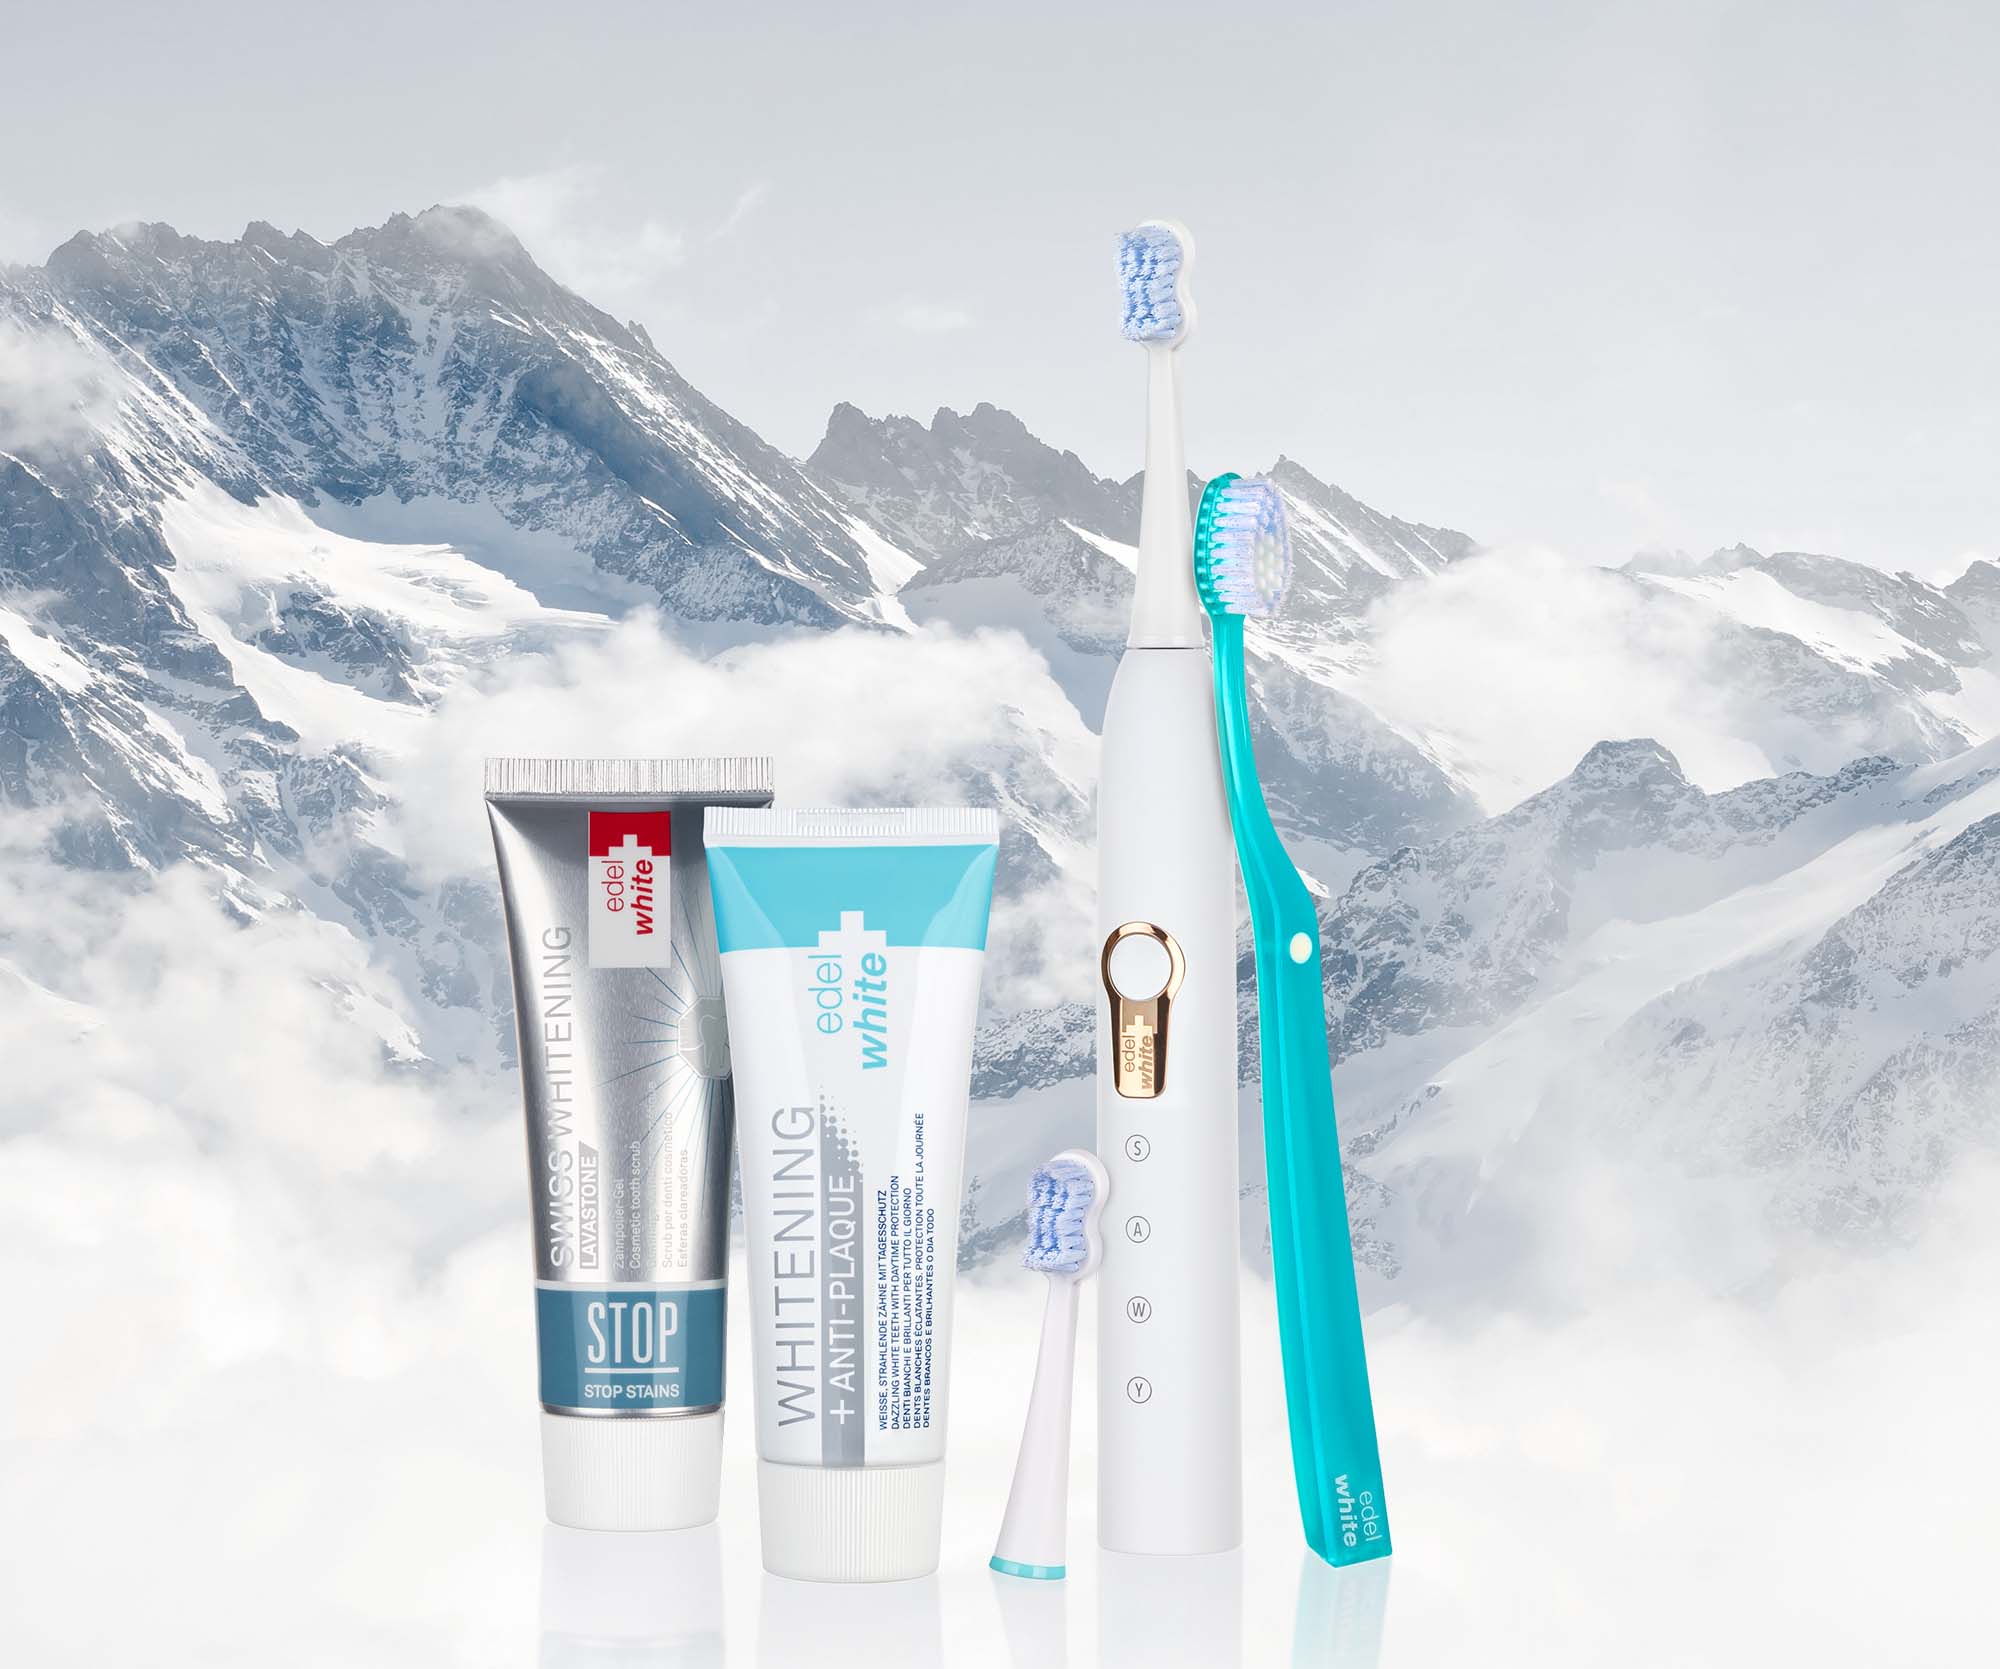 Whitening toothpaste with Swiss mountain landscape